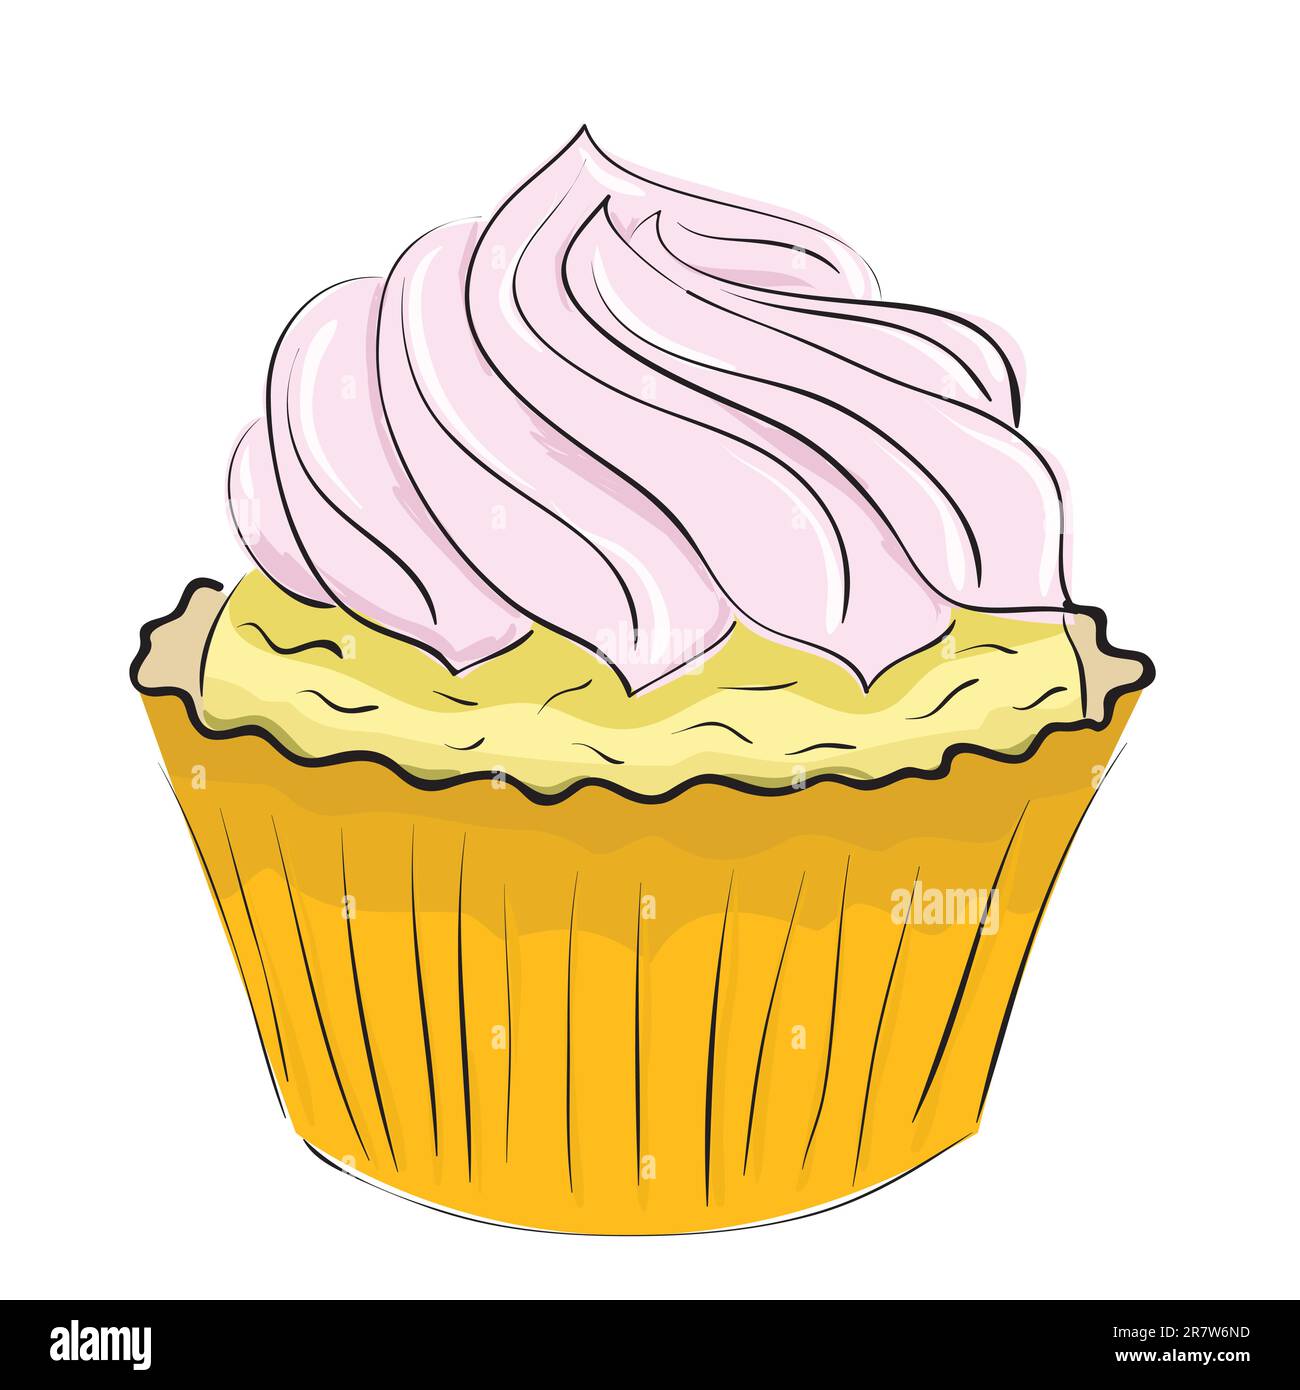 cake with whipped cream on a white background. Vector illustration. Stock Vector